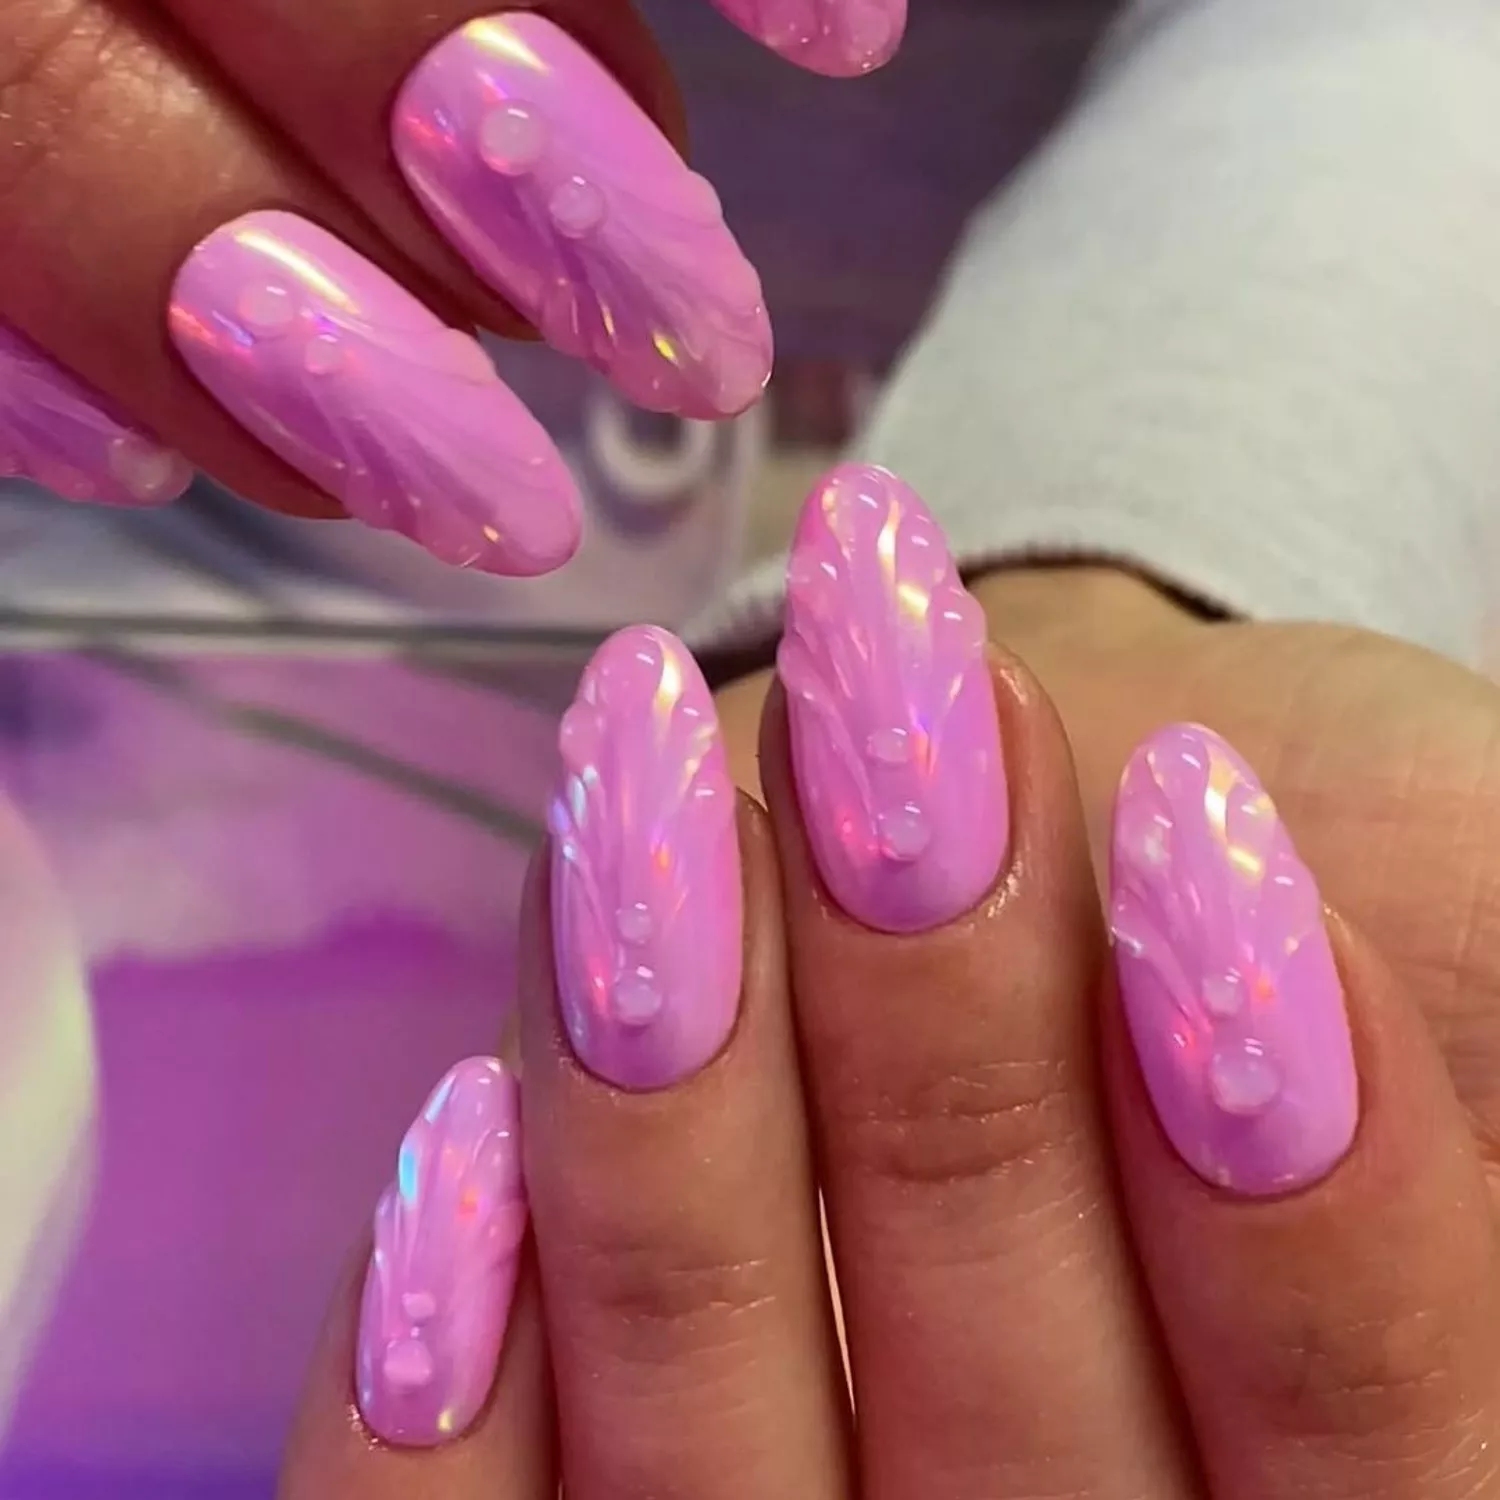 Bubblegum pink manicure with sculpted mermaid shell details